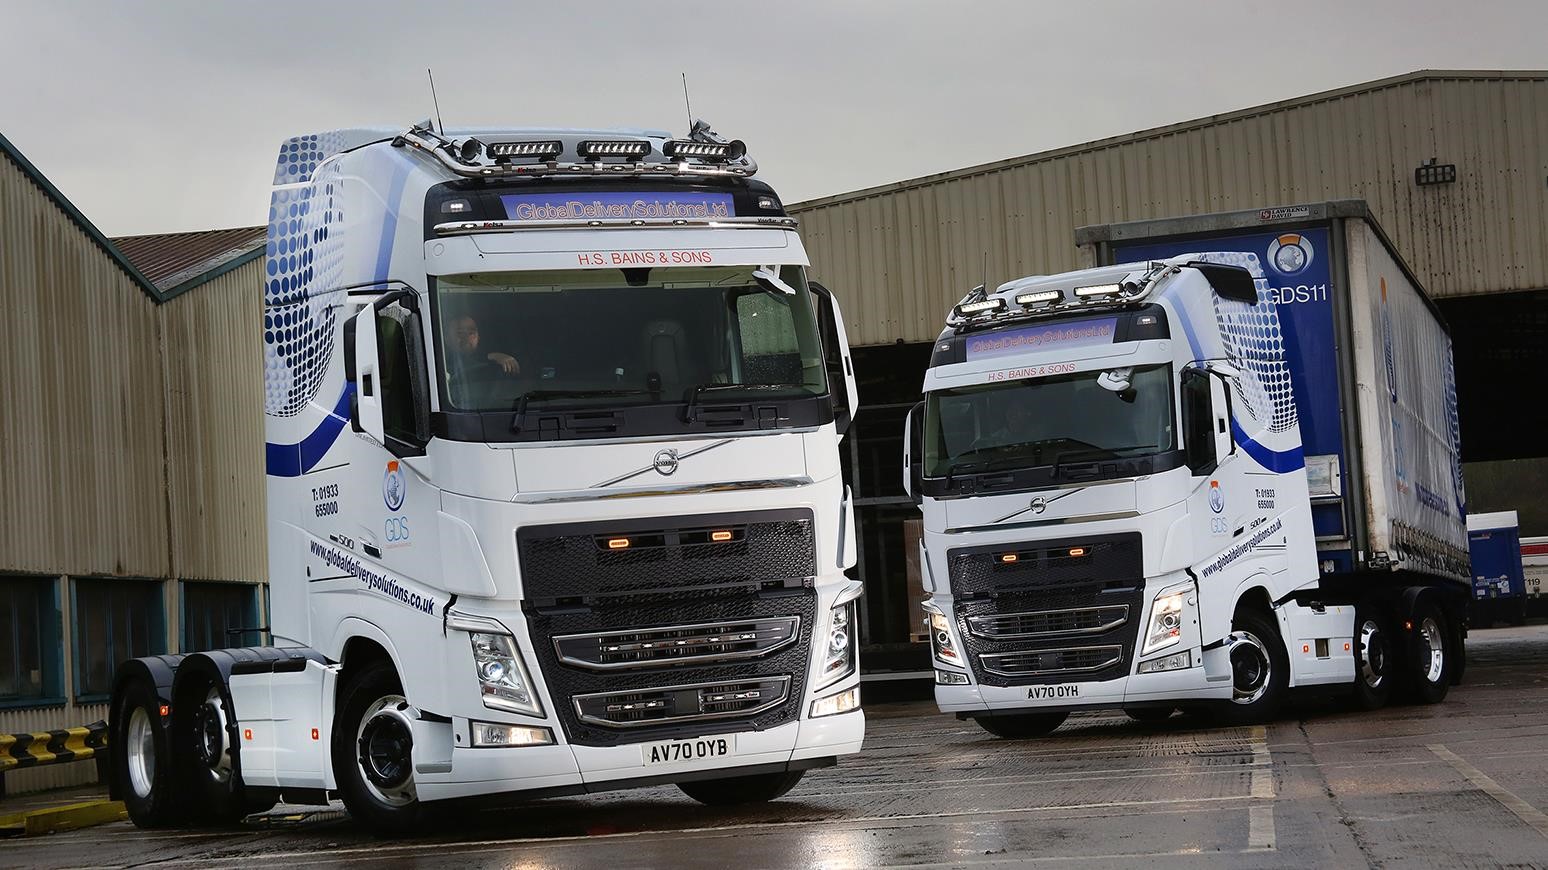 Wellingborough-Based Hauler Adds 2 New Volvo FH Unlimited Edition With I-Save Trucks To Its Fleet